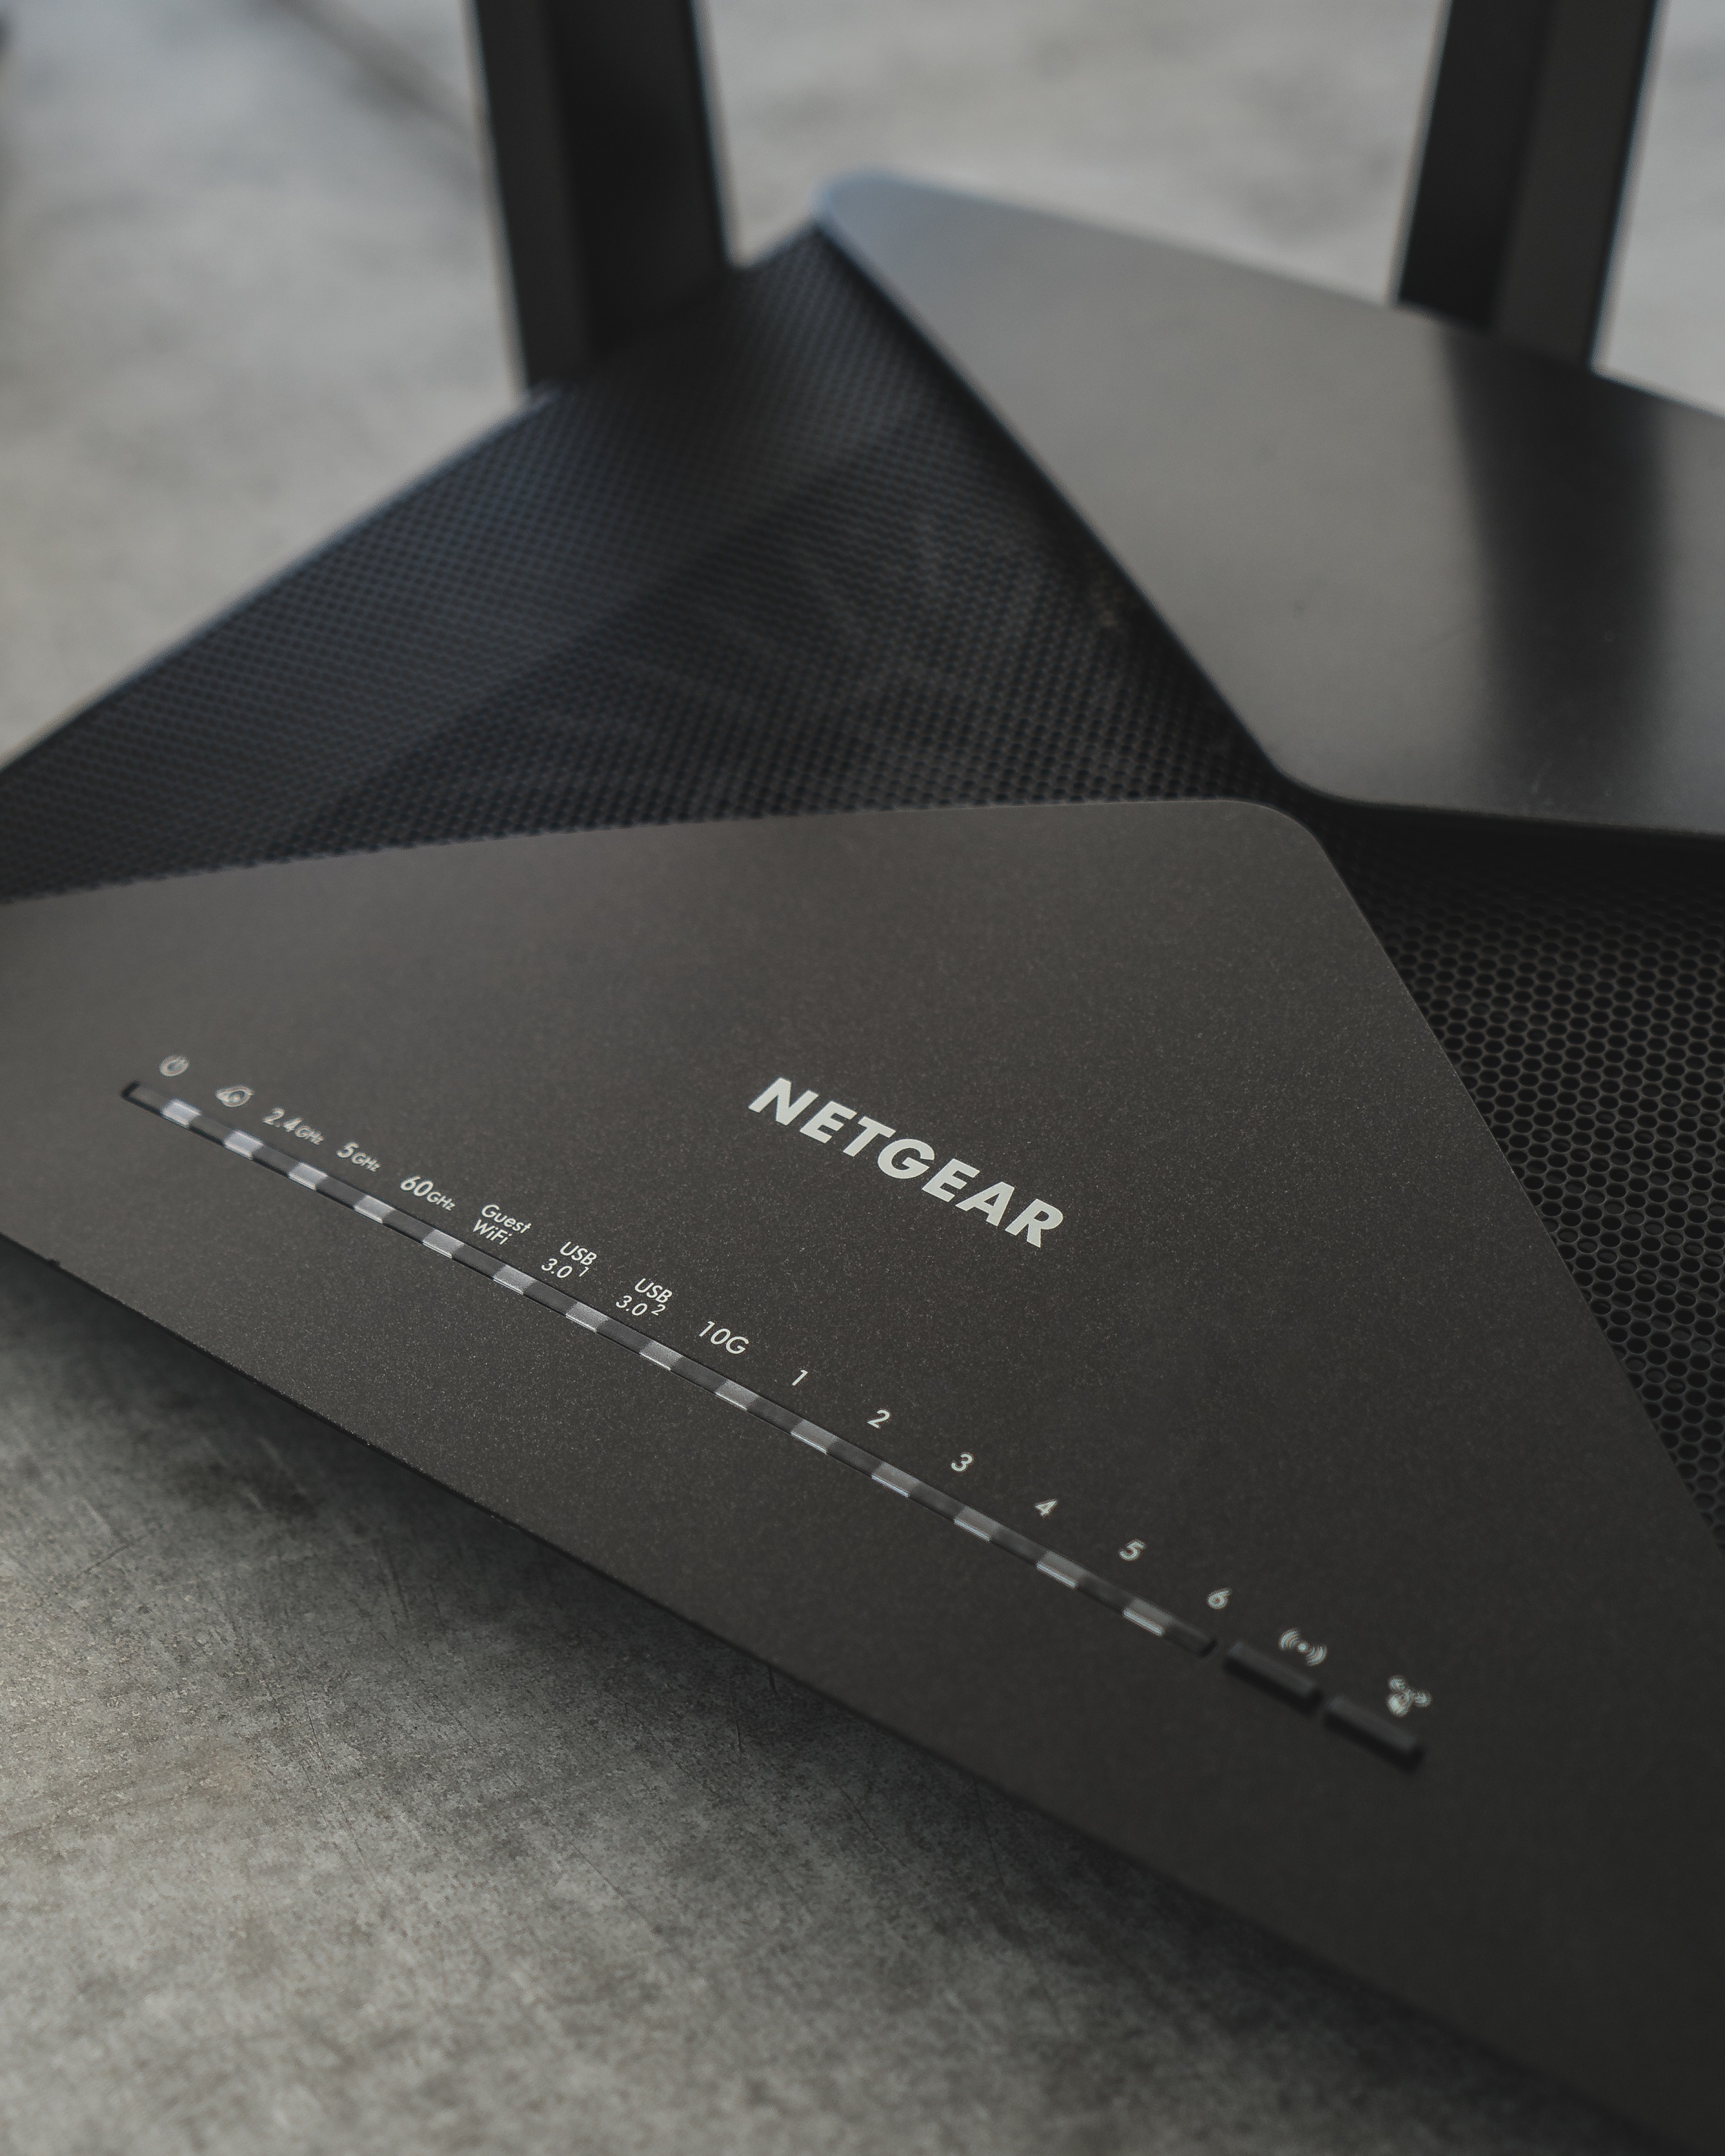 NETGEAR Nighthawk X10 – AD7200 802.11ac/ad WiFi Router with 1.7GHz Quad-core Processor (R9000) - image 3 of 6